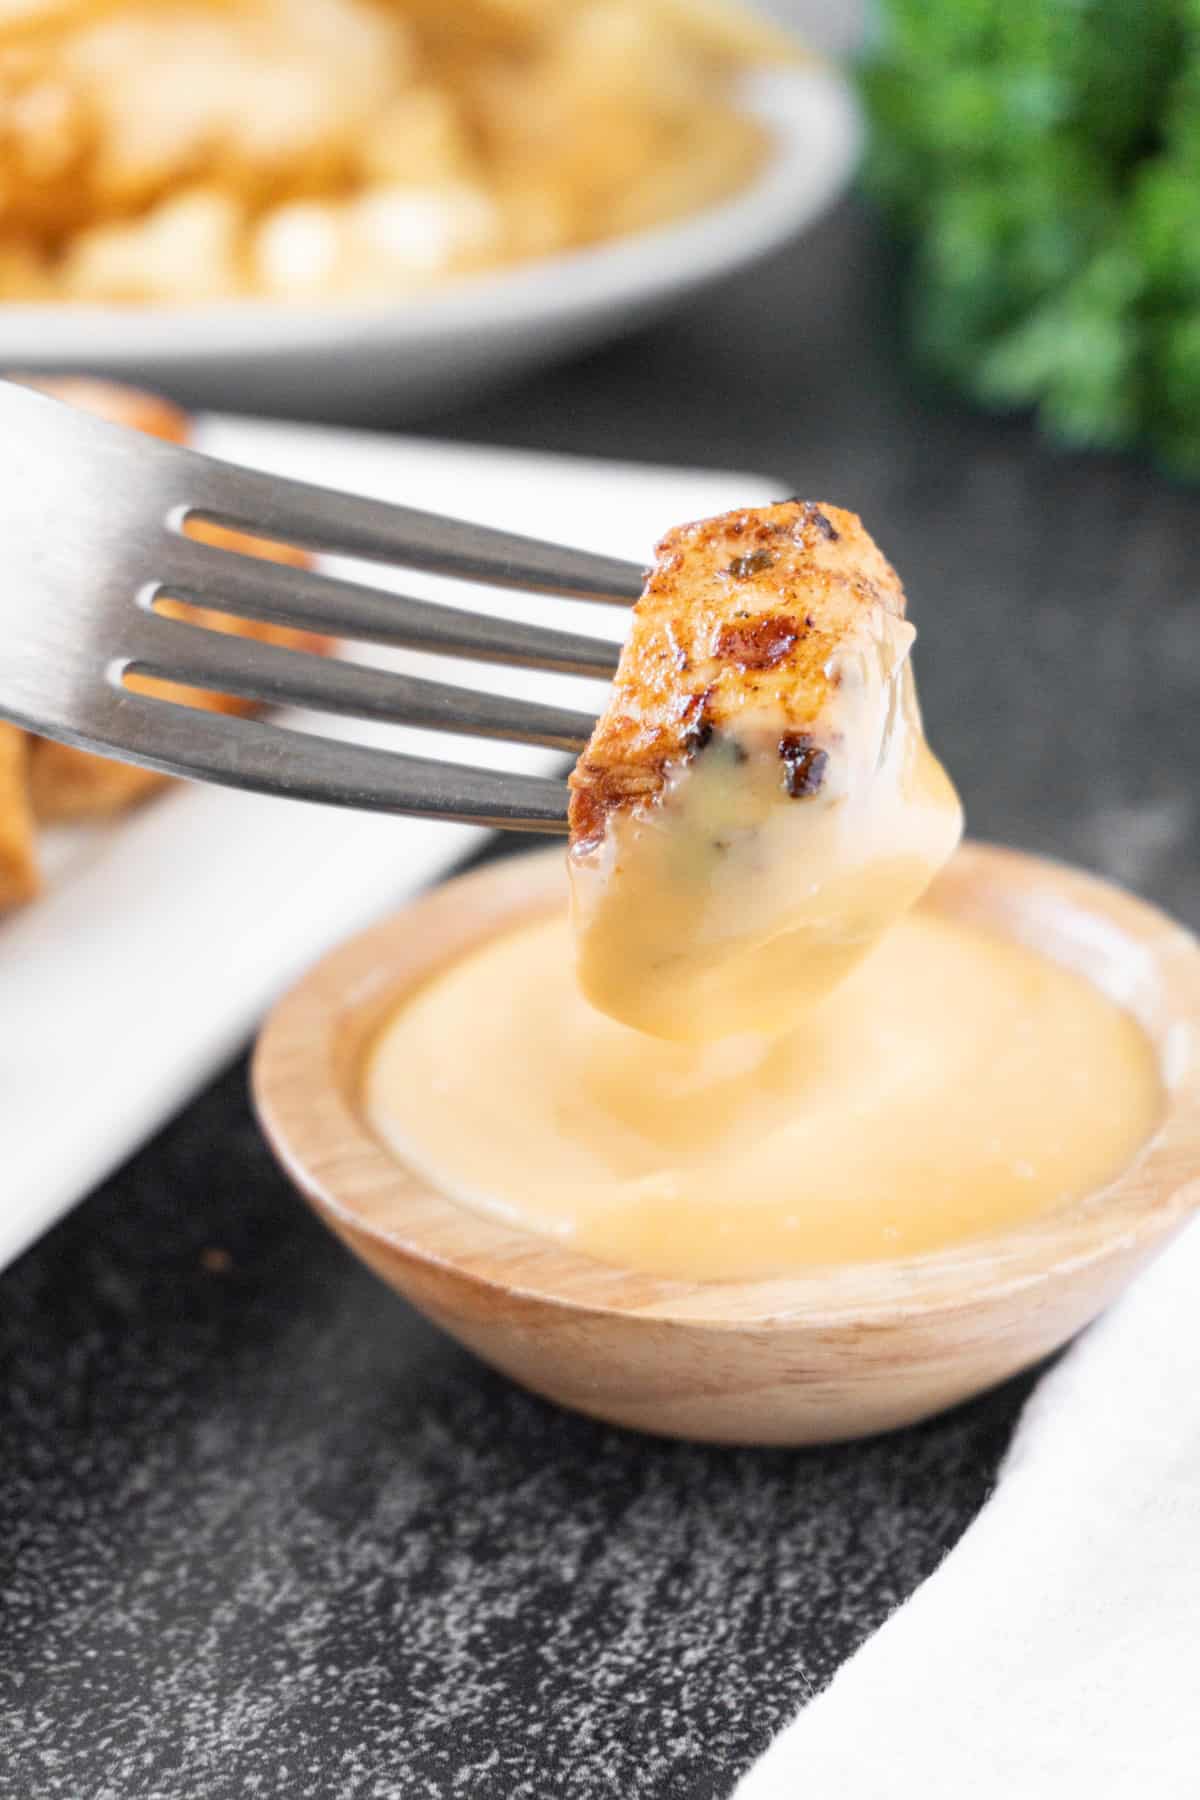 Grilled Chicken Nugget dipped in sauce